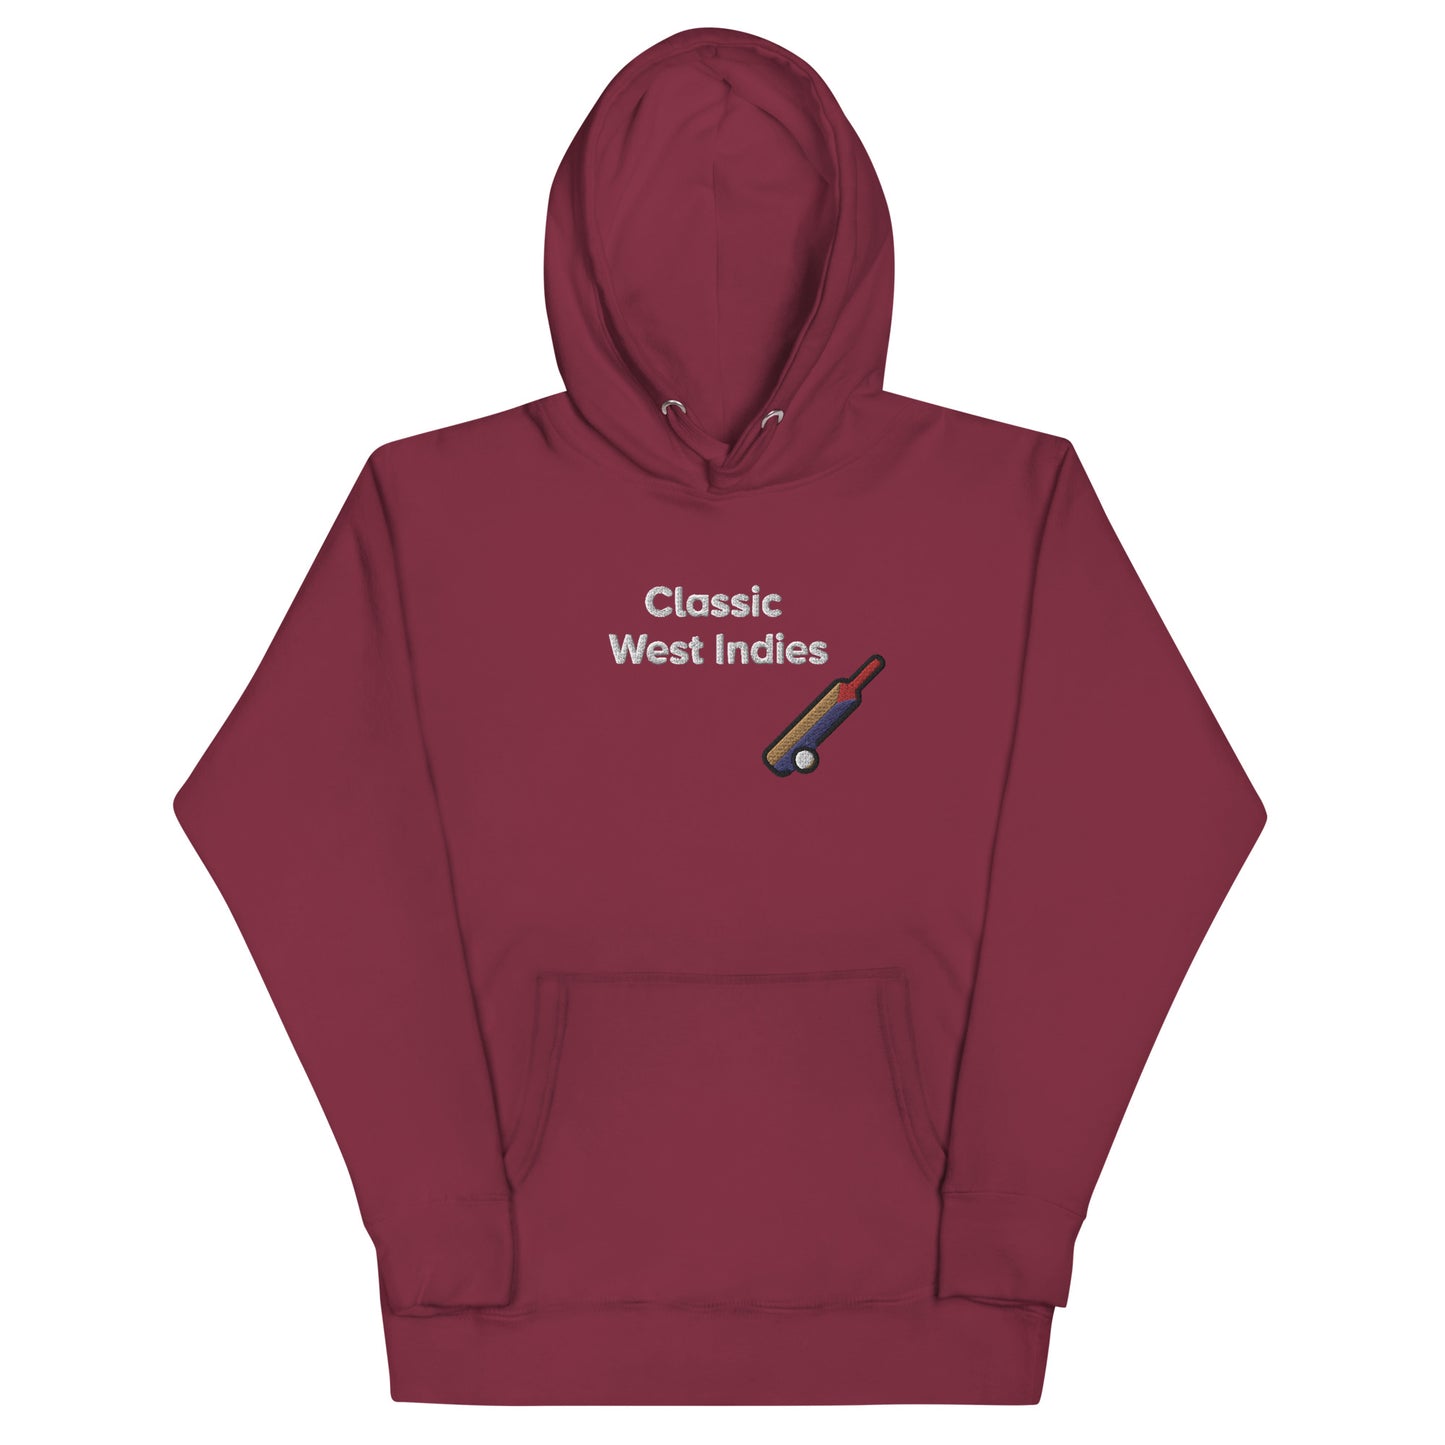 'Classic West Indies' Embroidered Hoodie